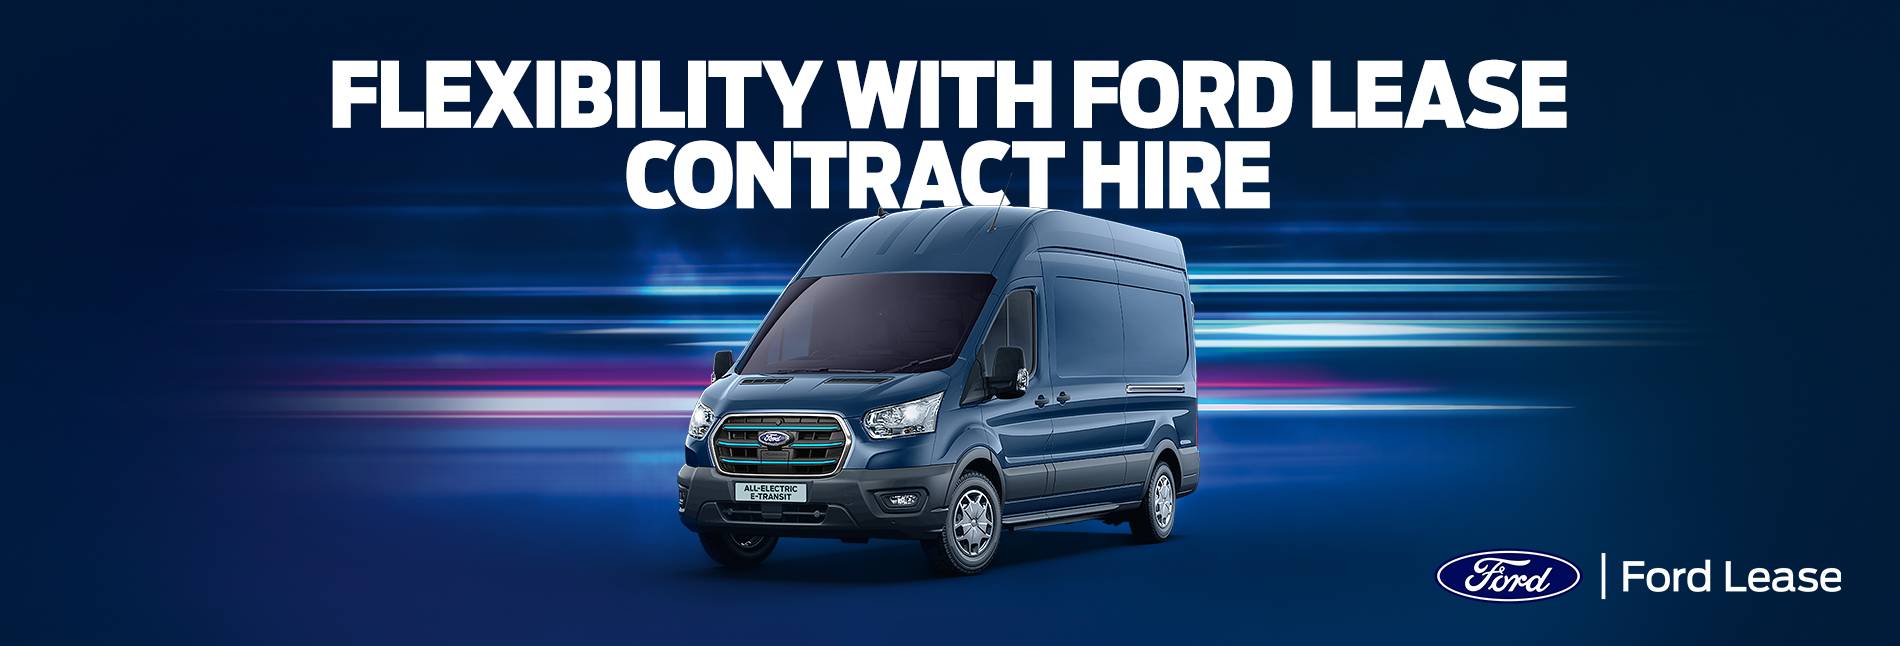 Say hello to E-Transit Flexibility from Ford Lease Contract Hire